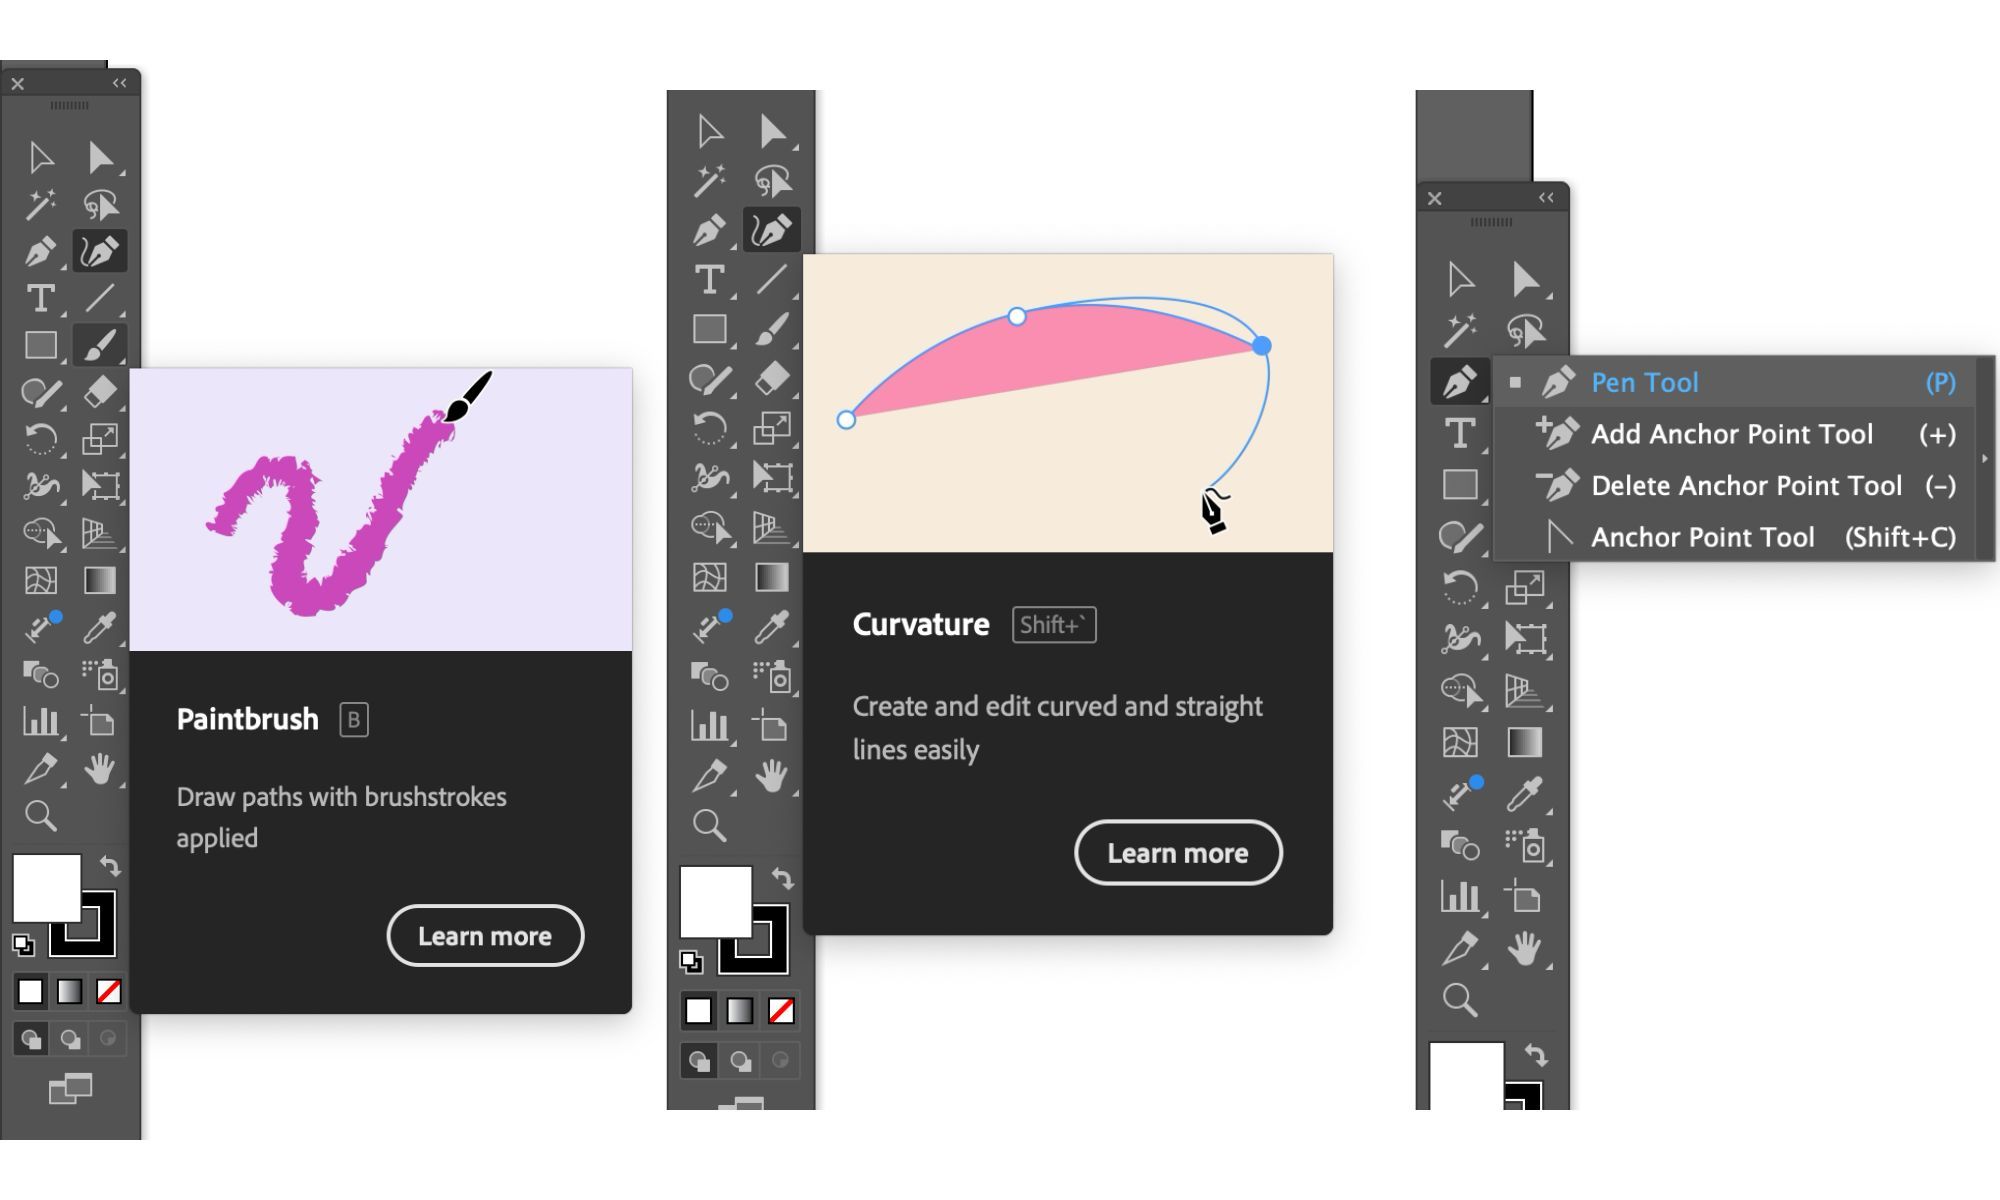 Screenshots of Adobe Illustrator, highlighting the Pen, Curvature and Paintbrush tool in Illustrator